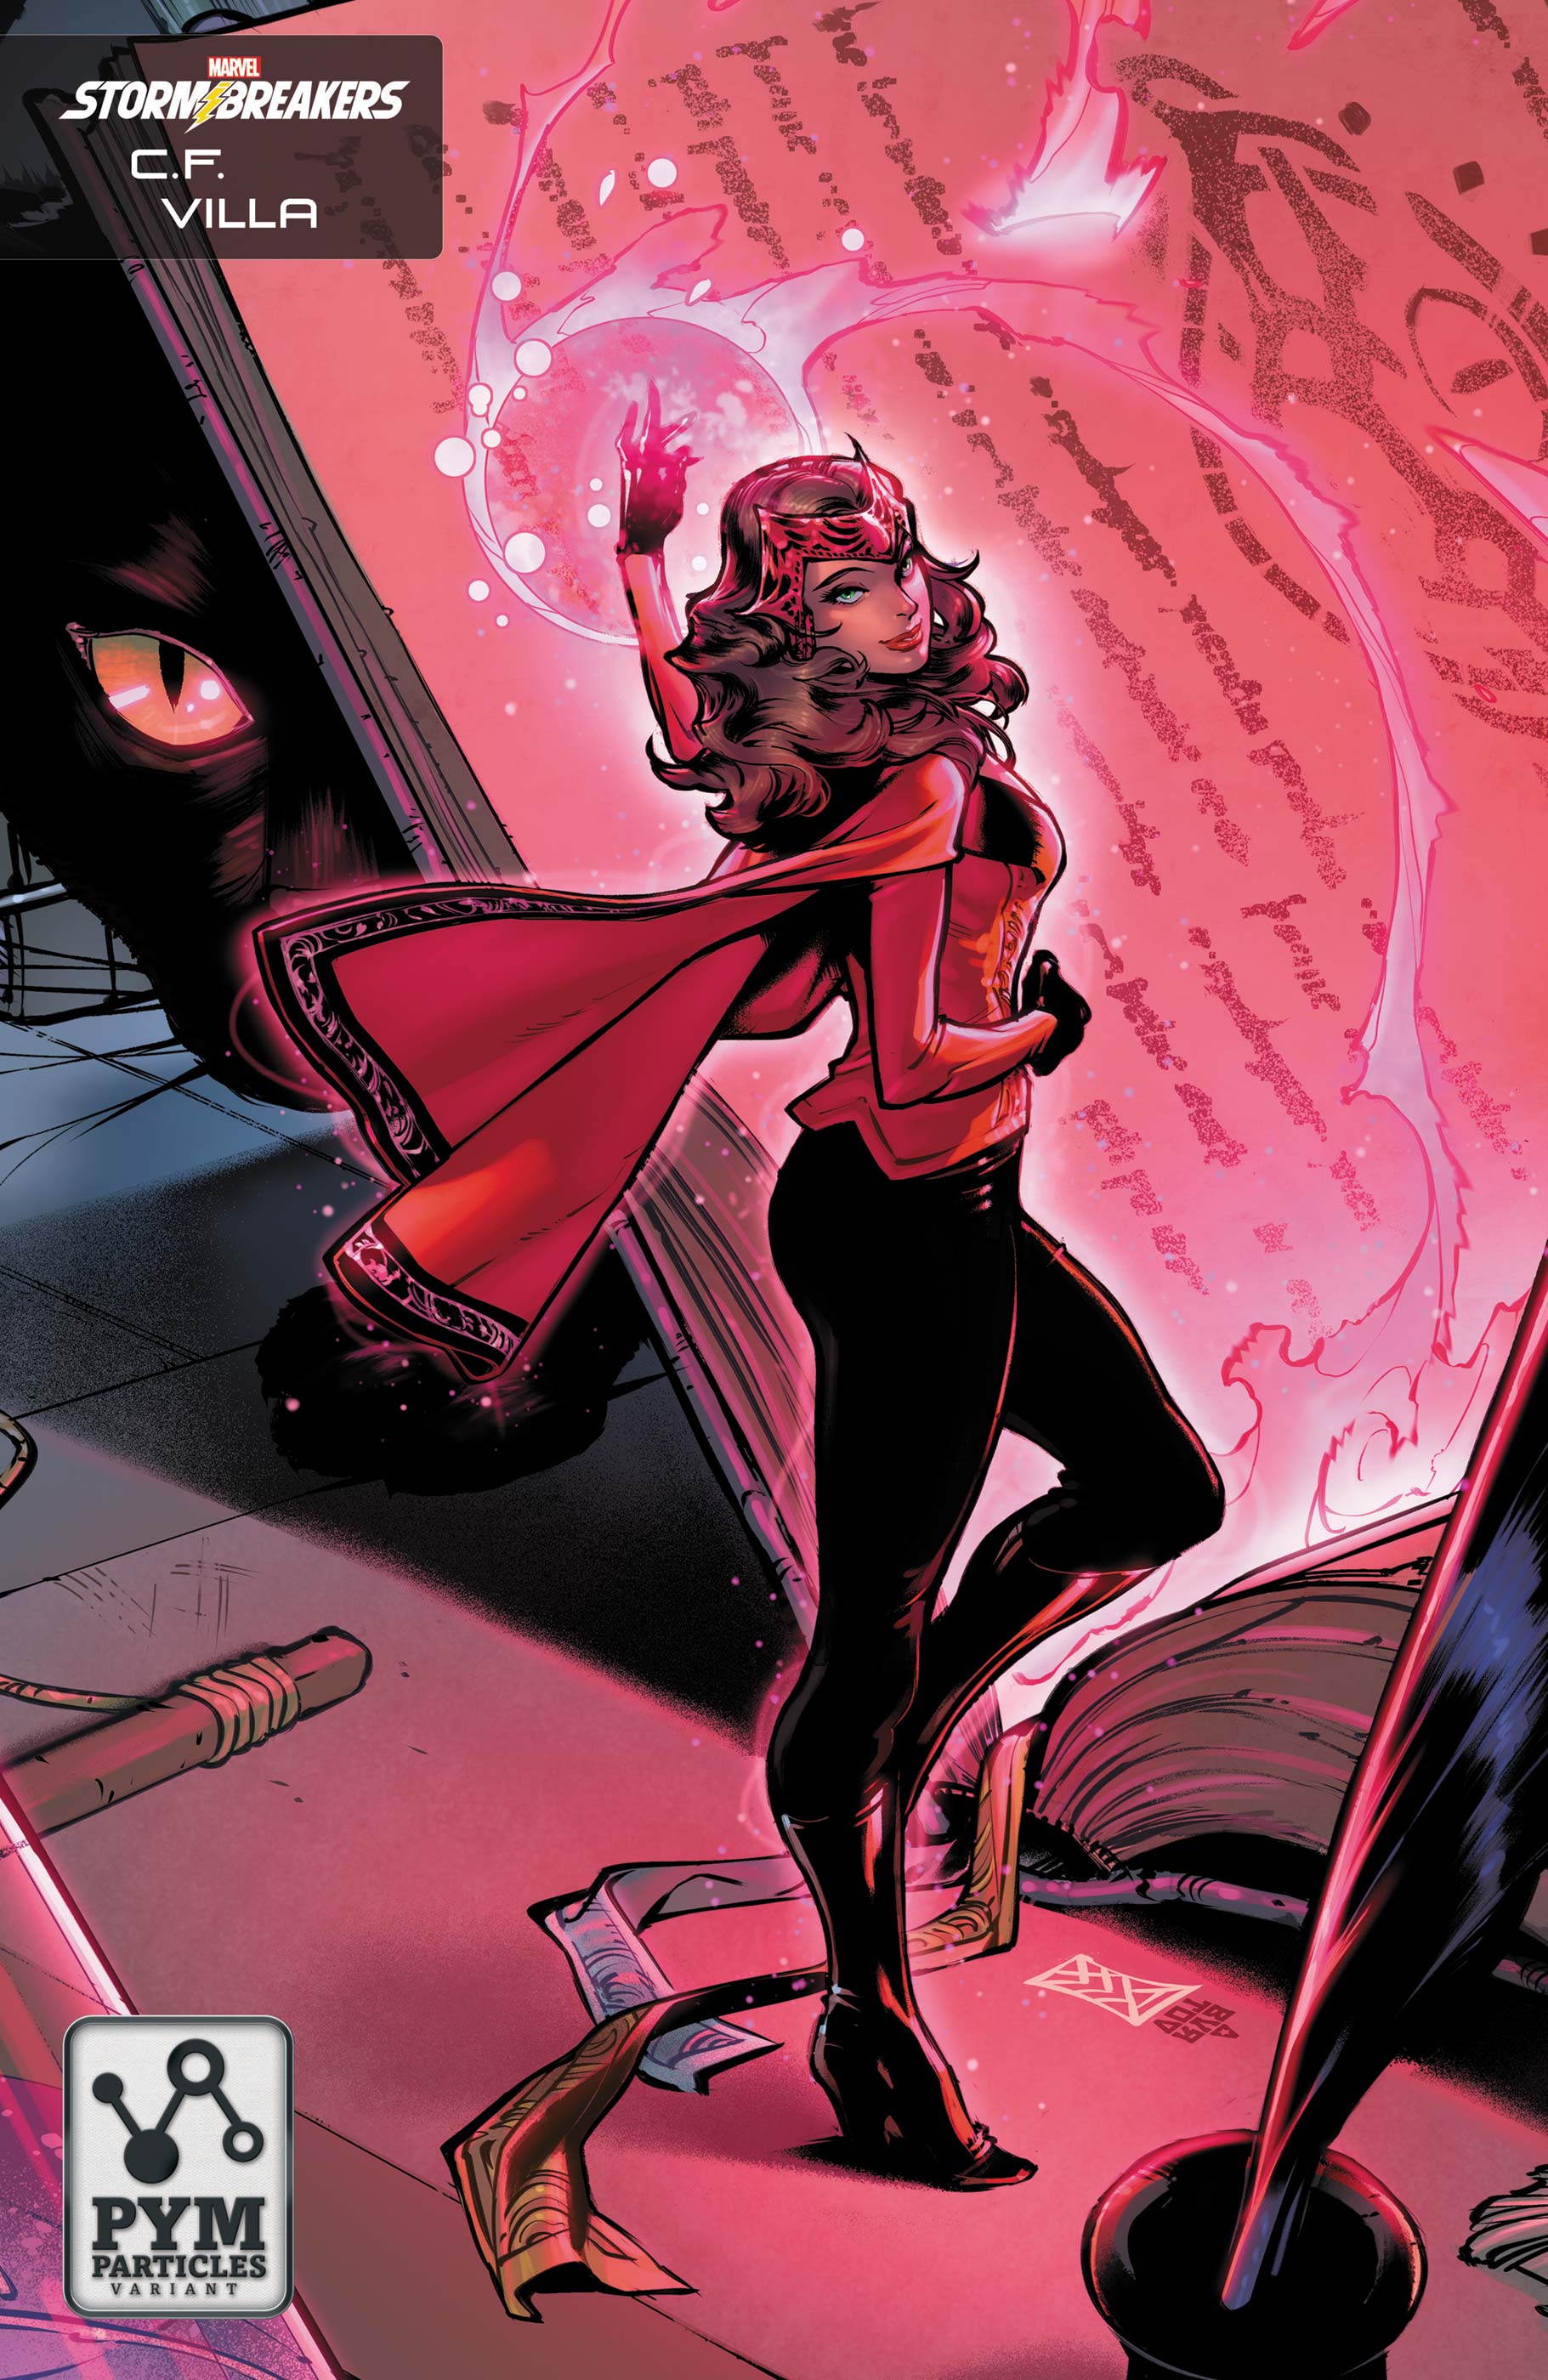 Scarlet Witch (2023) #2 (Variant)